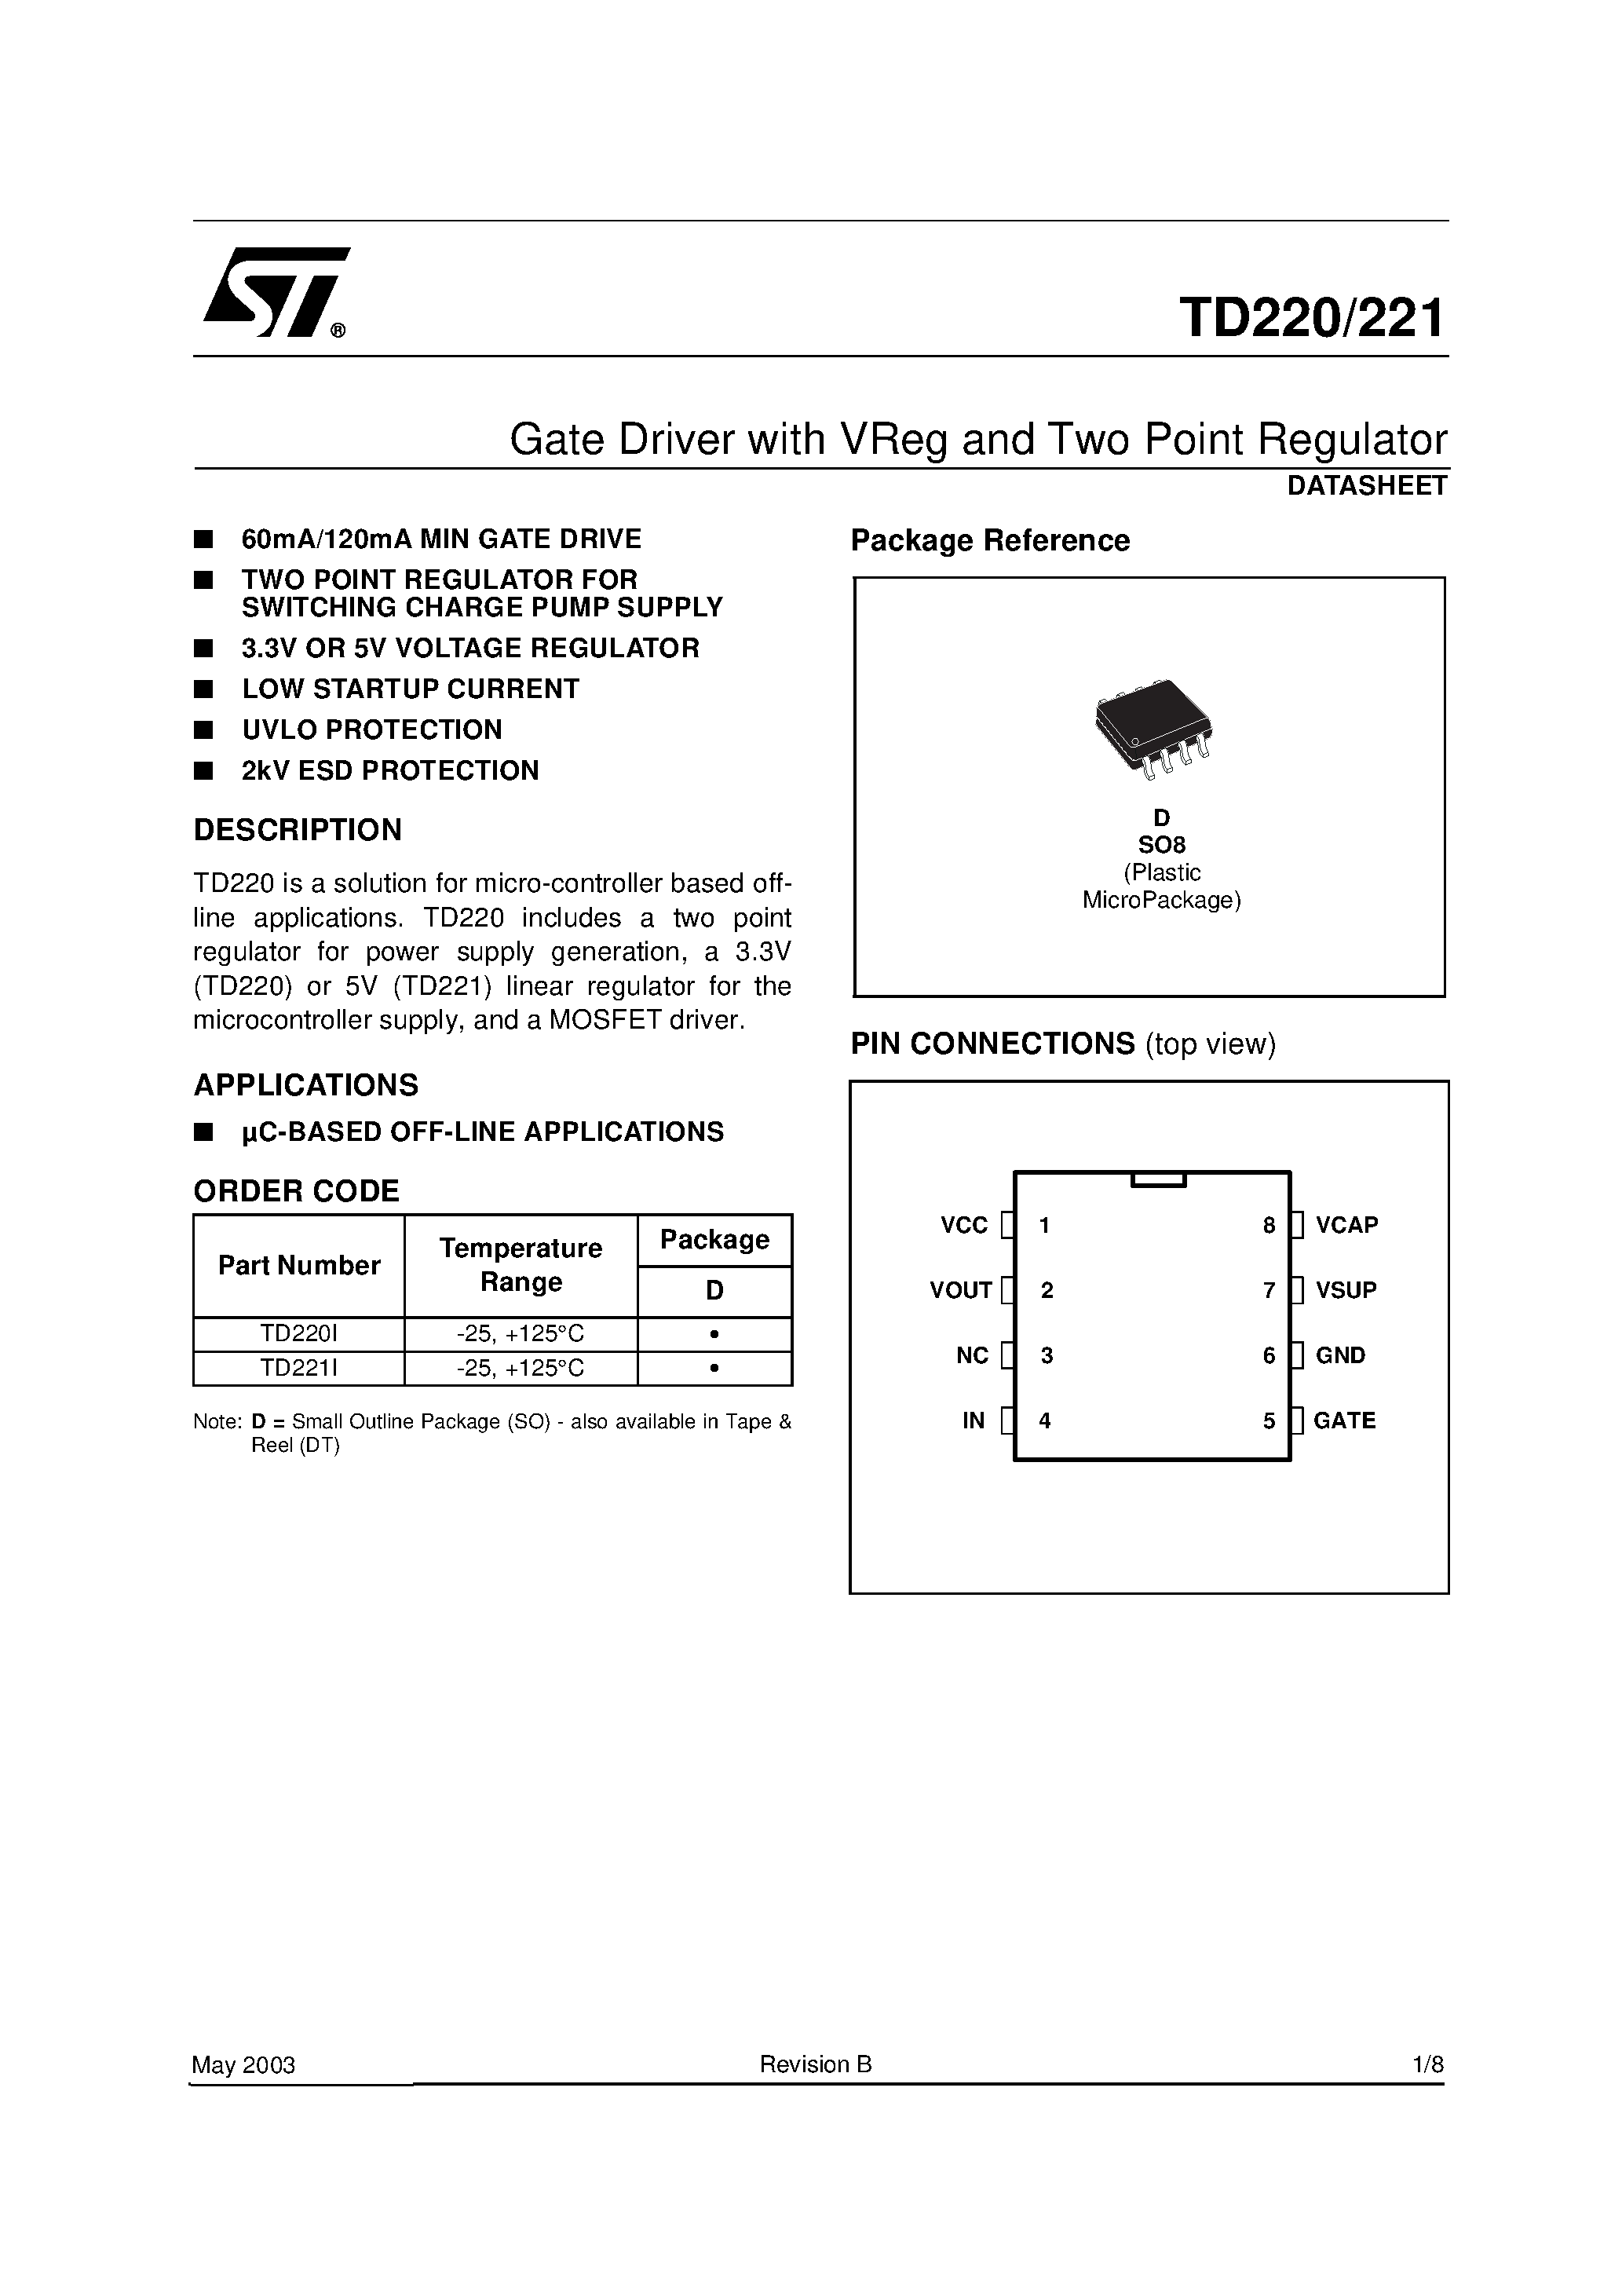 Datasheet TD220 - Gate Driver with VReg and Two Point Regulator page 1